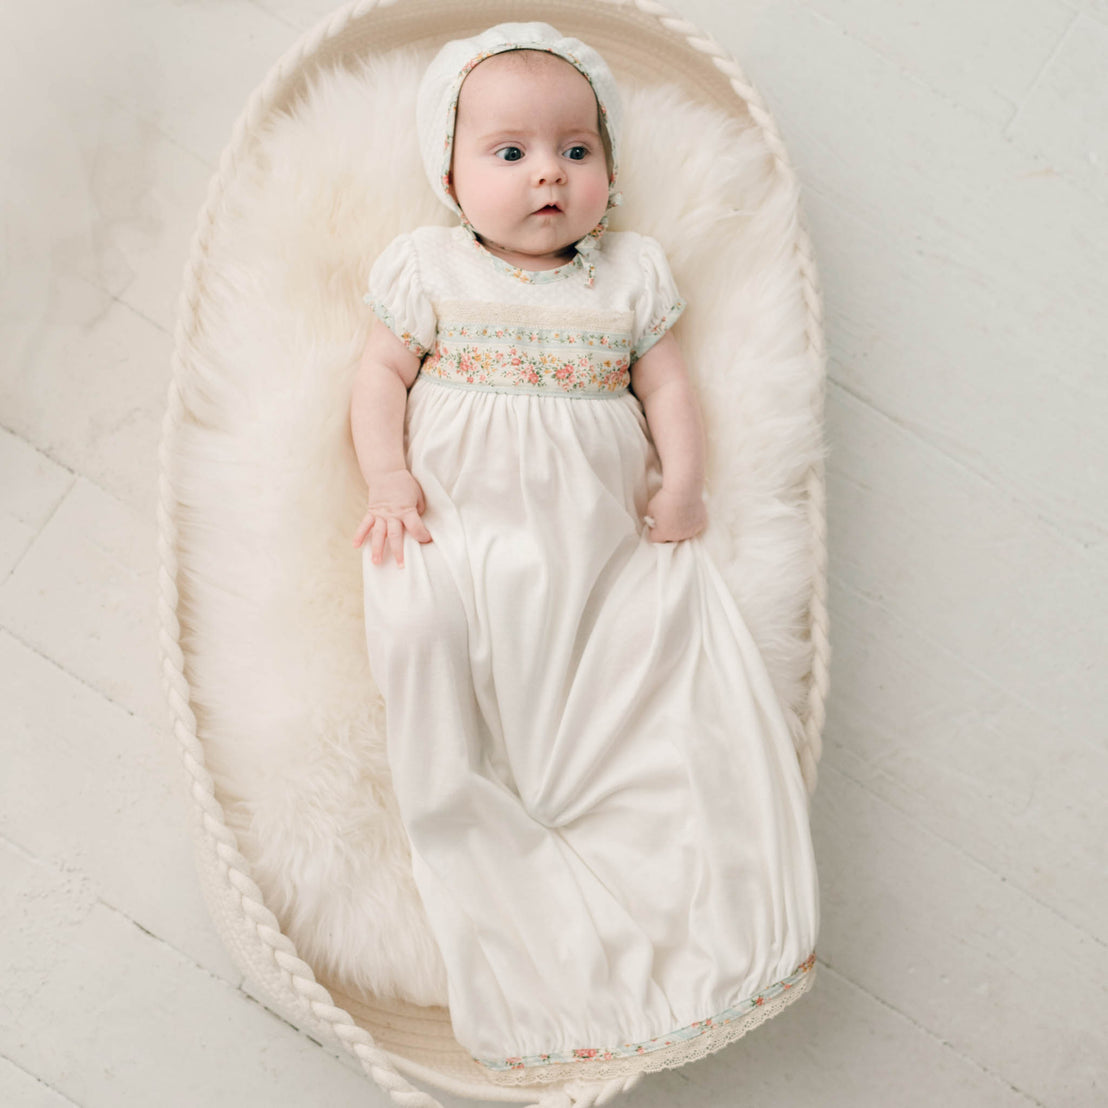 Newborn baby girl wearing the "Powder Blue" Eloise Layette Gown and matching Eloise Bonnet.